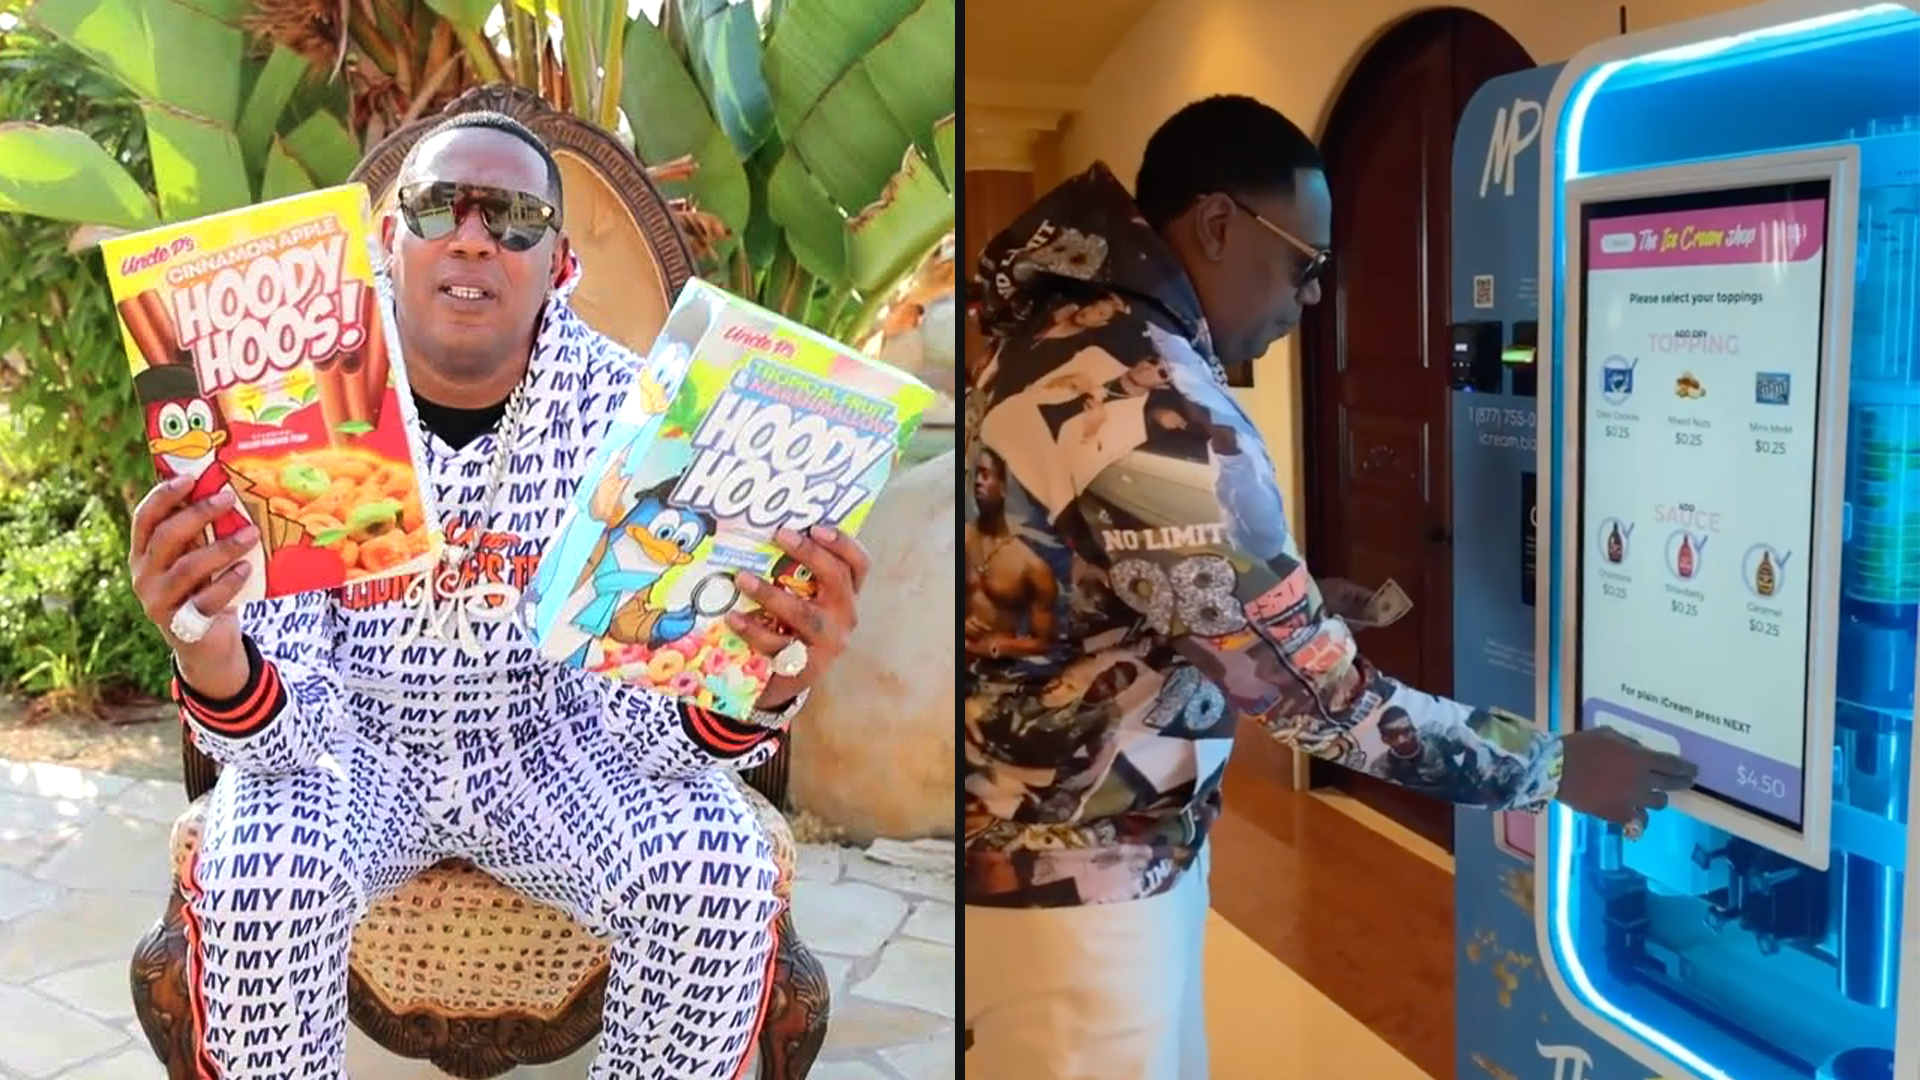 Master P Expands Empire With A Cereal Brand And High-Tech Ice Cream Machine On The Way